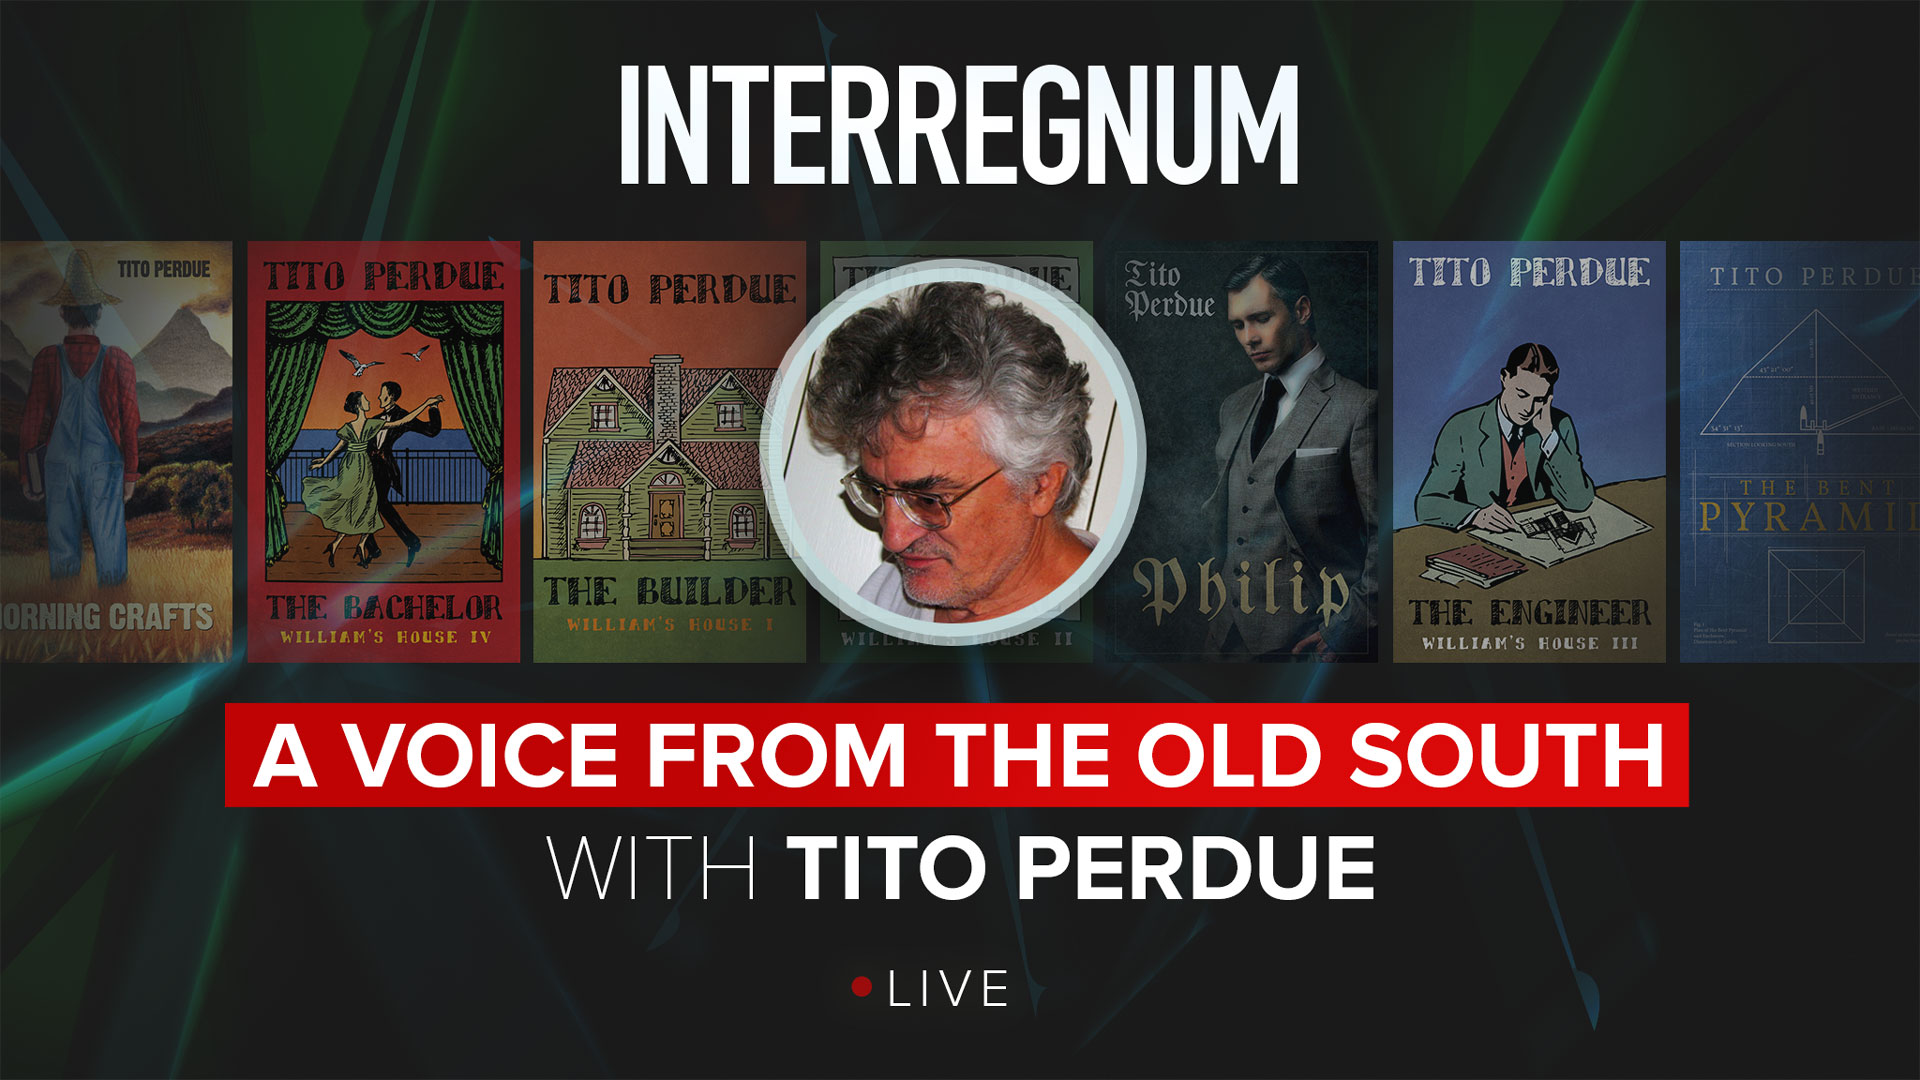 A Voice from the Old South with Tito Perdue